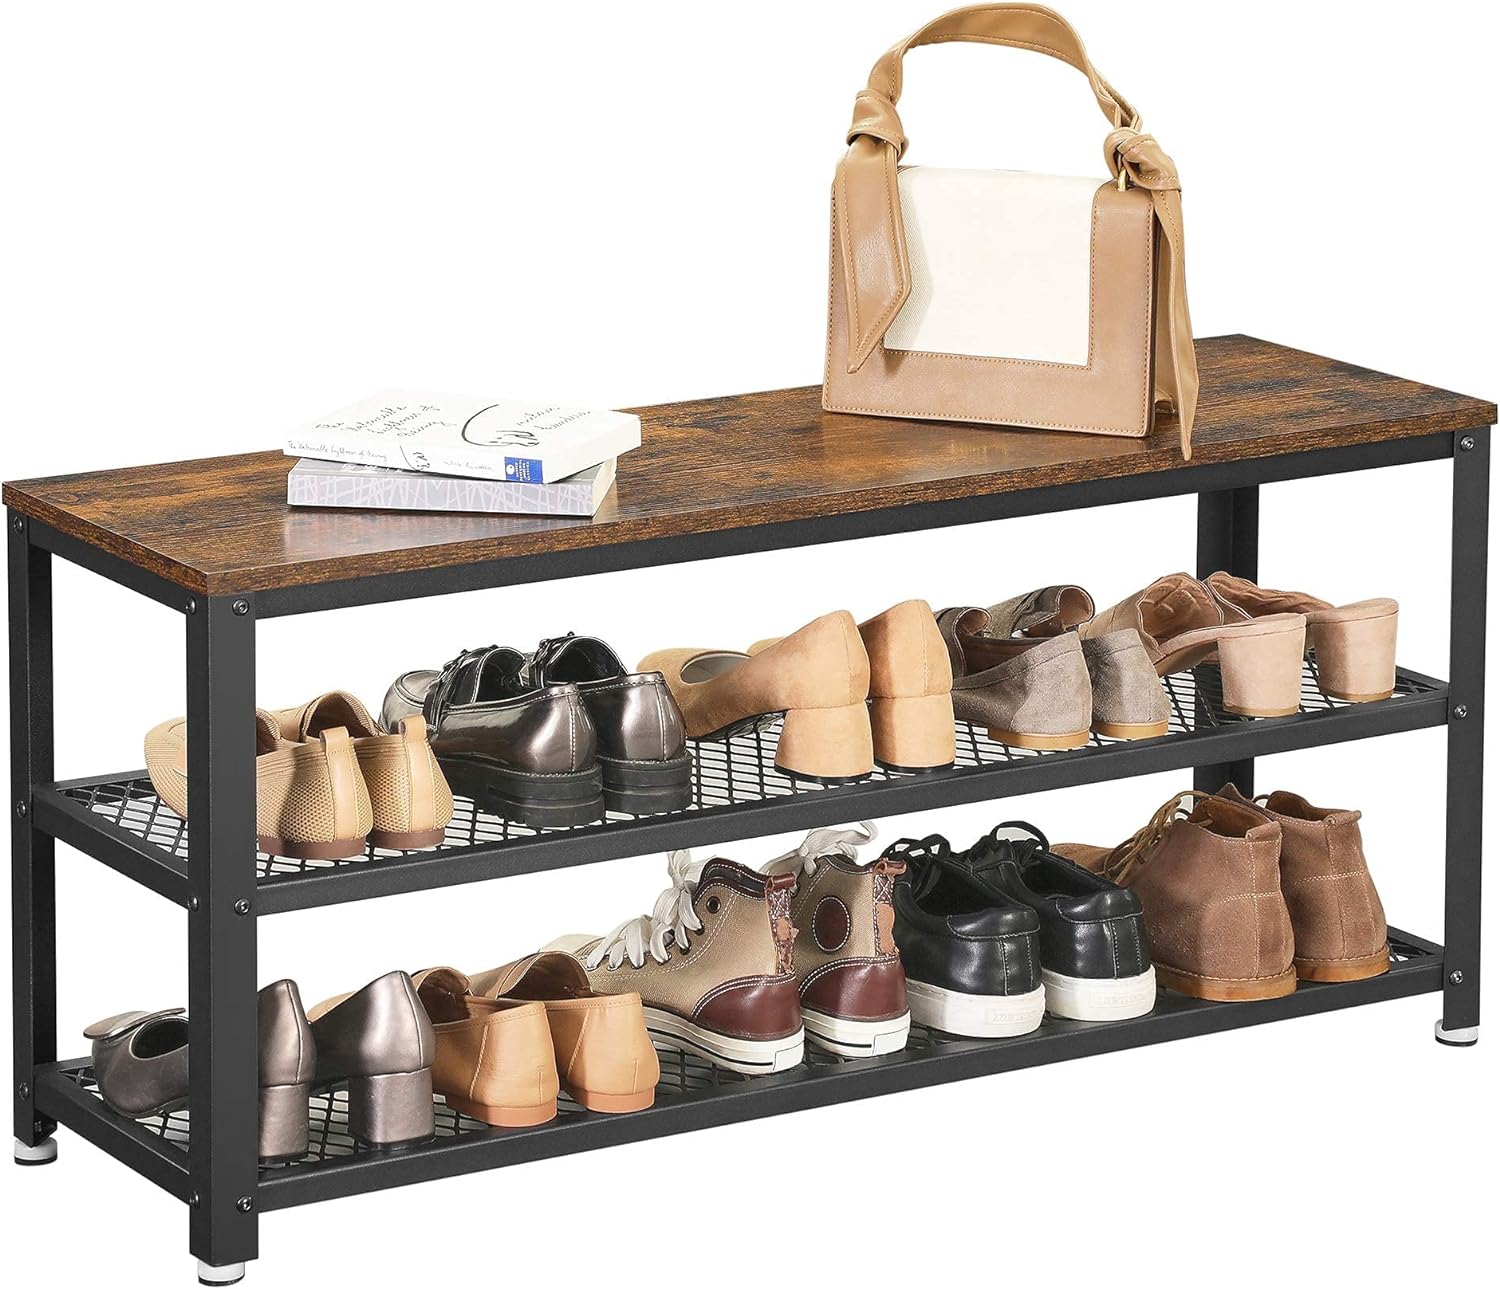 https://bigbigmart.com/wp-content/uploads/2023/10/VASAGLE-Shoe-Bench-3-Tier-Shoe-Rack-11.8-x-39.4-x-17.7-Inches-Shoe-Shelf-Storage-Bench-with-Metal-Mesh-Shelves-and-Seat-Free-Standing-Shoe-Organizer-for-Entryway-Rustic-Brown-and-Black5.jpg